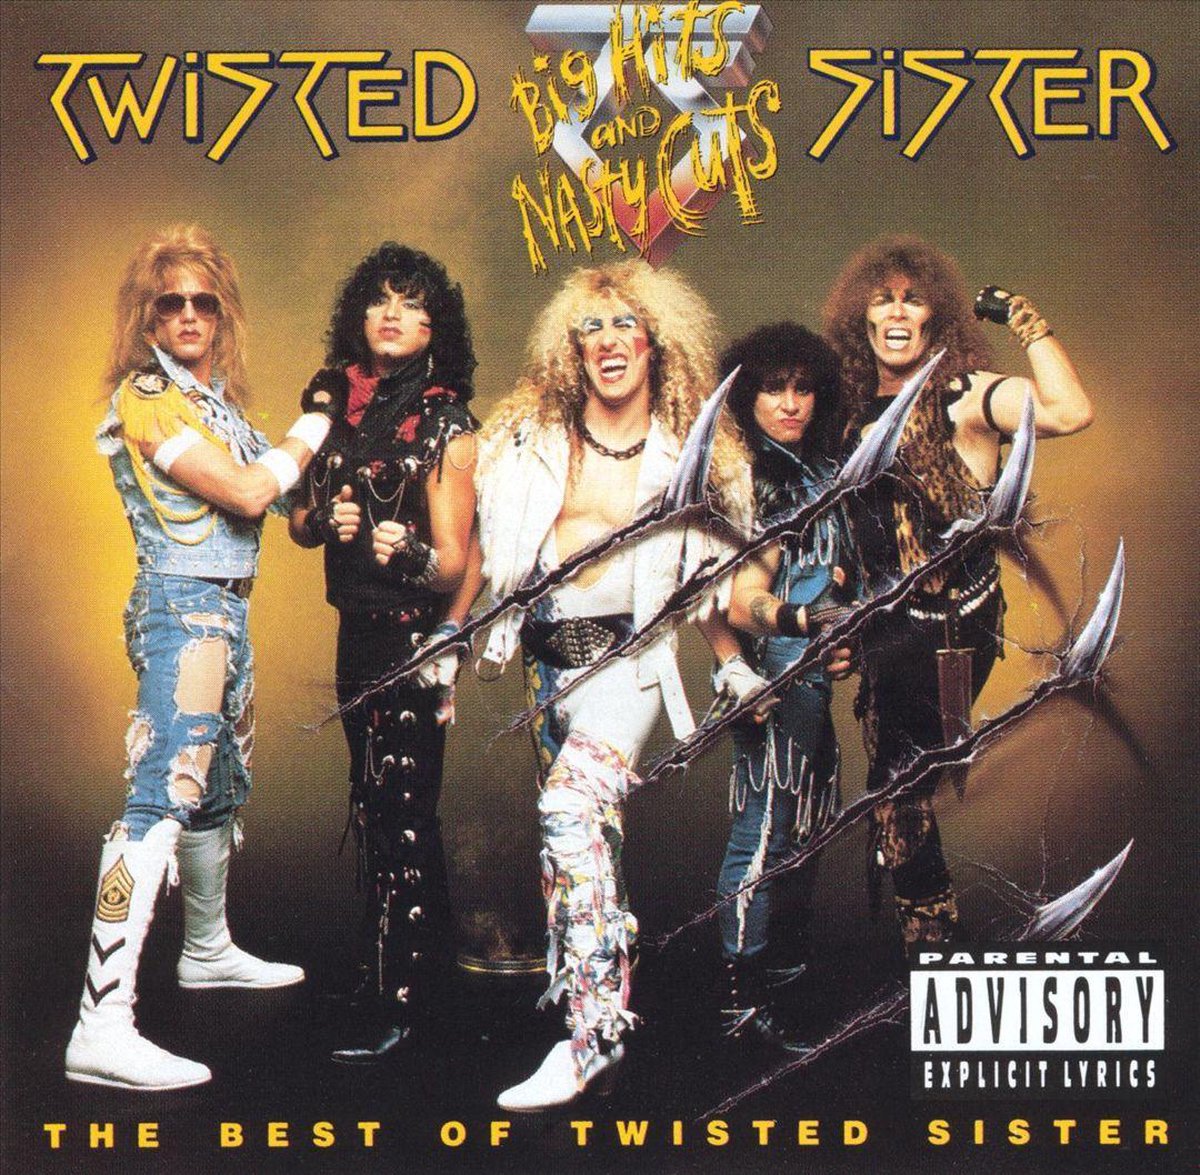 Big Hits And Nasty Cuts-Best Of Twisted Sister - Twisted Sister